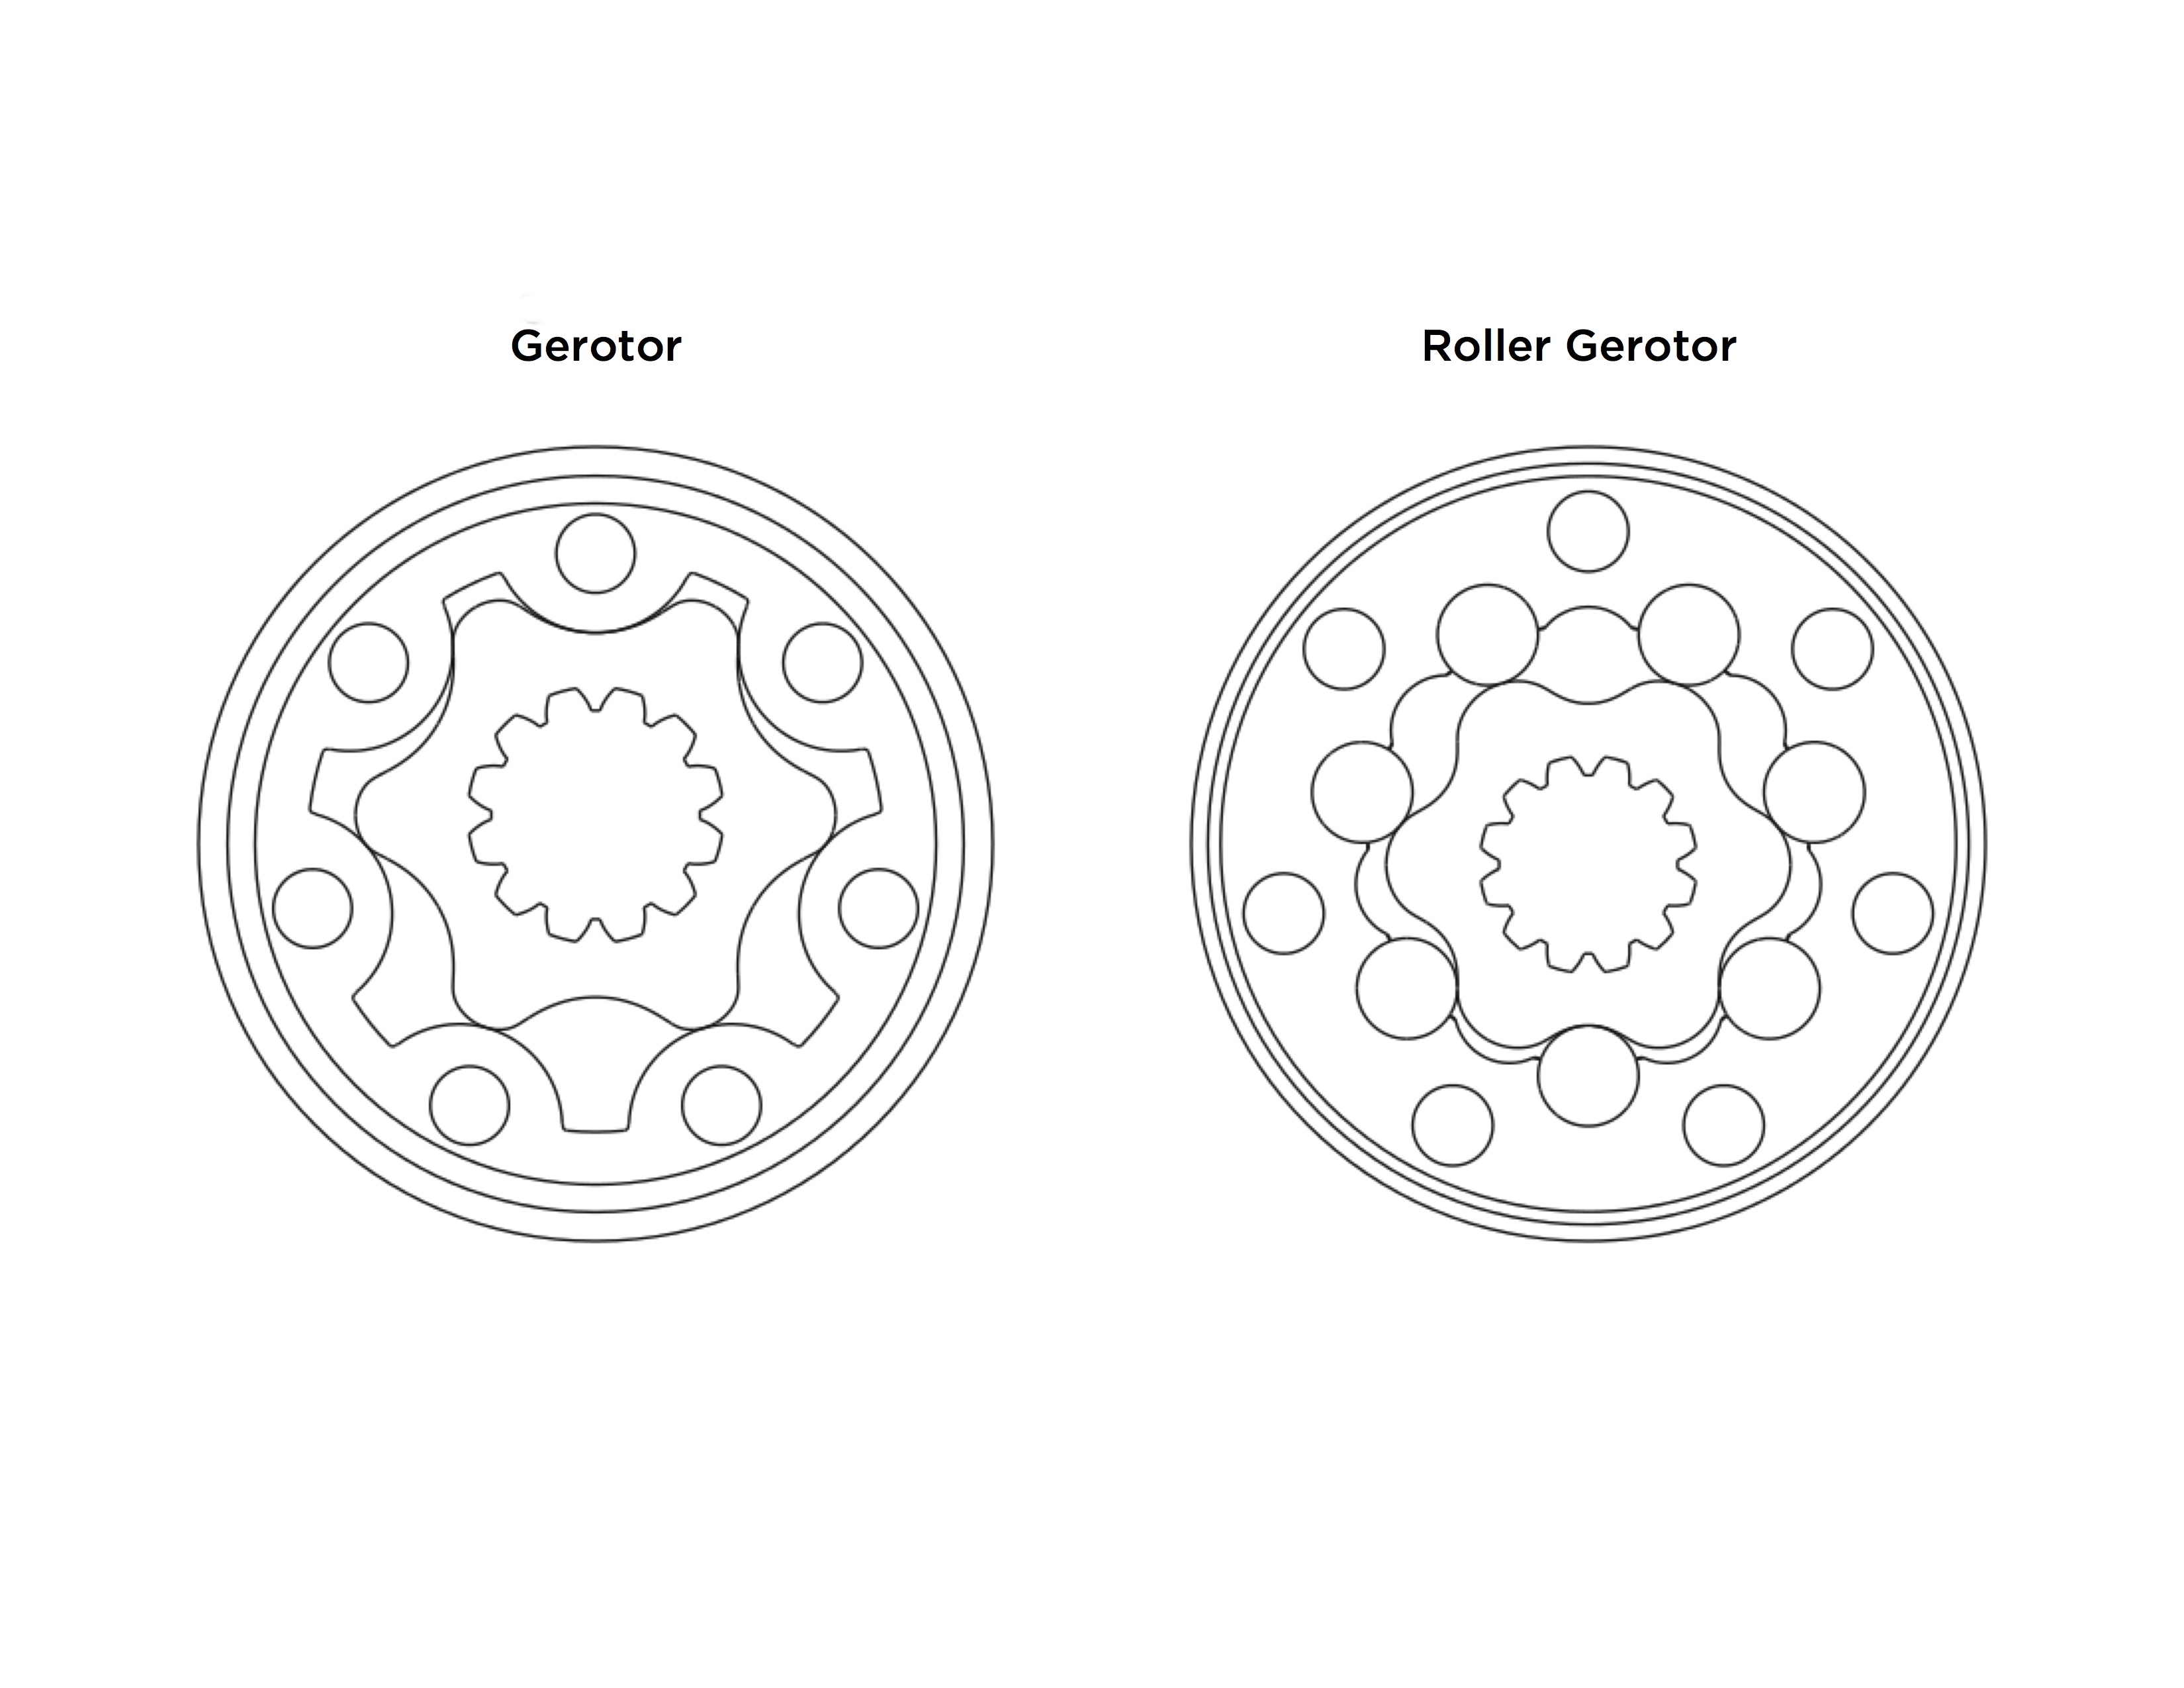 A graphic showing the difference between a gerotor design and a roller gerotor design.